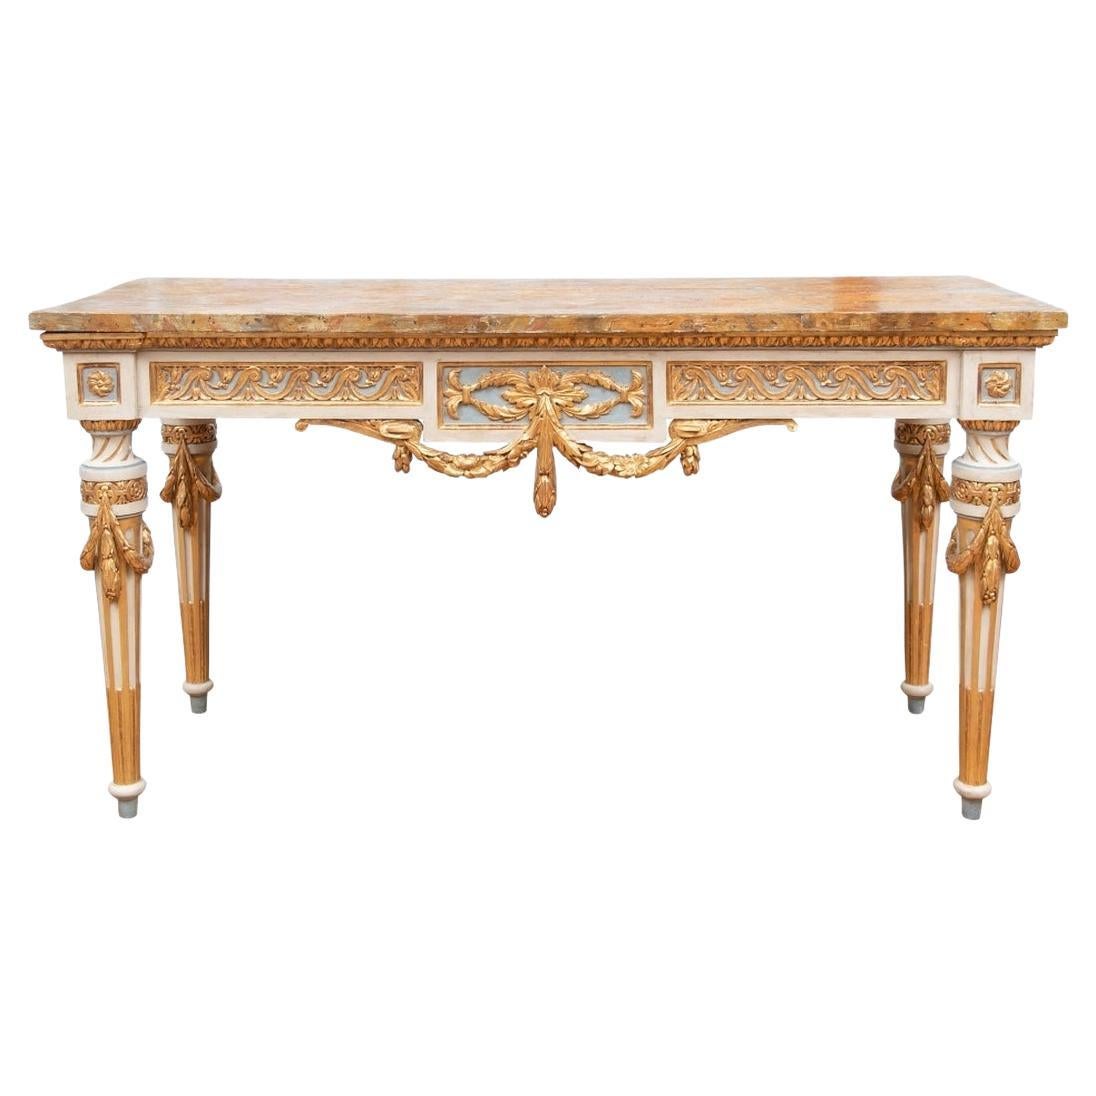 Extraordinary French Style Carved, Gilt And Paint Decorated Console